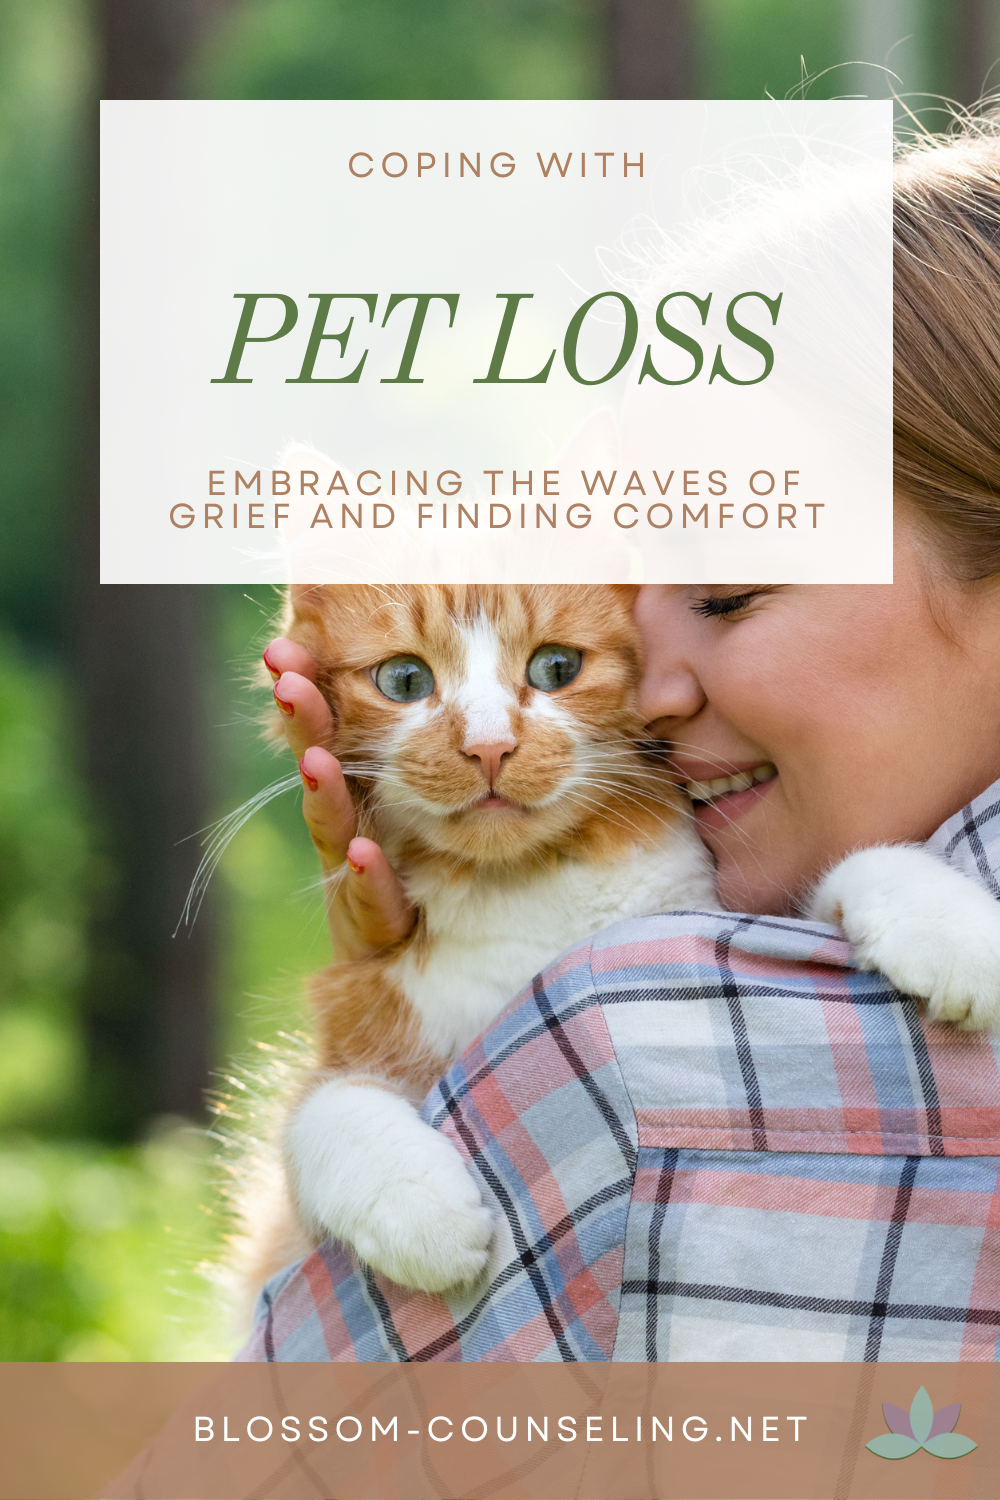 Coping with Pet Loss: Embracing the Waves of Grief and Finding Comfort